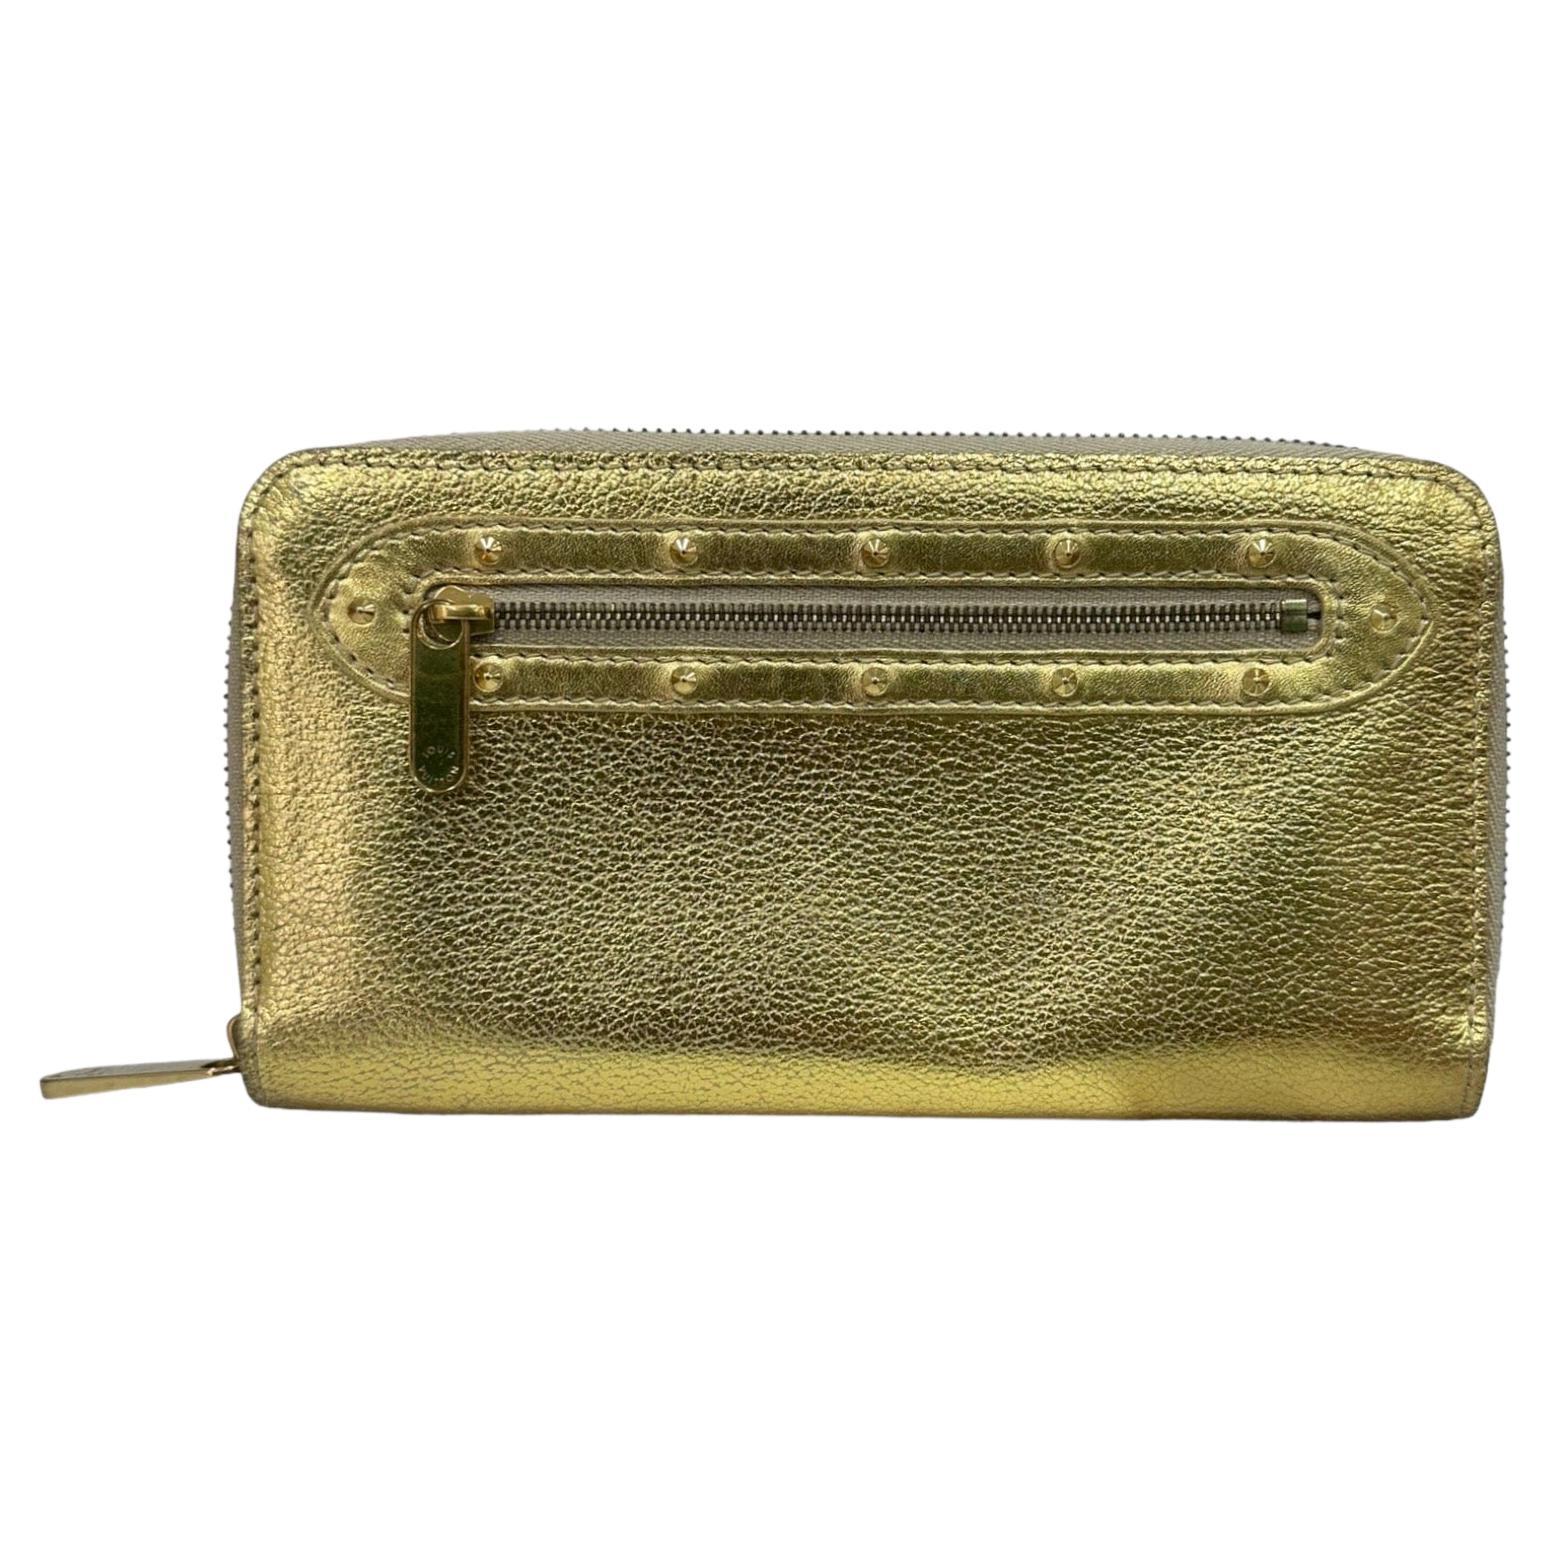 Sold at Auction: Unauthenticated Louis Vuitton Supreme Wallet